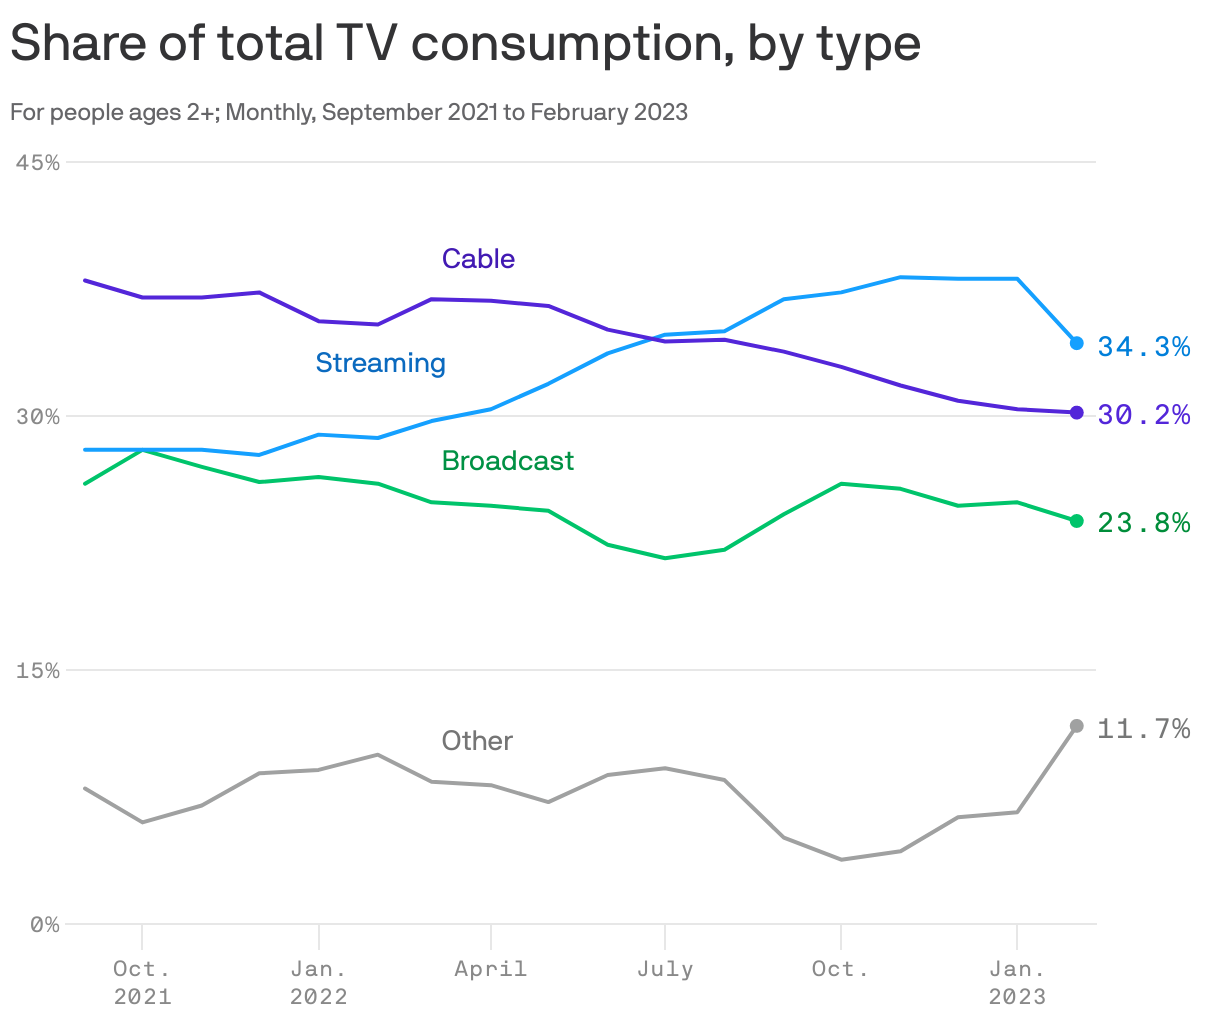 Share of total TV consumption, by type